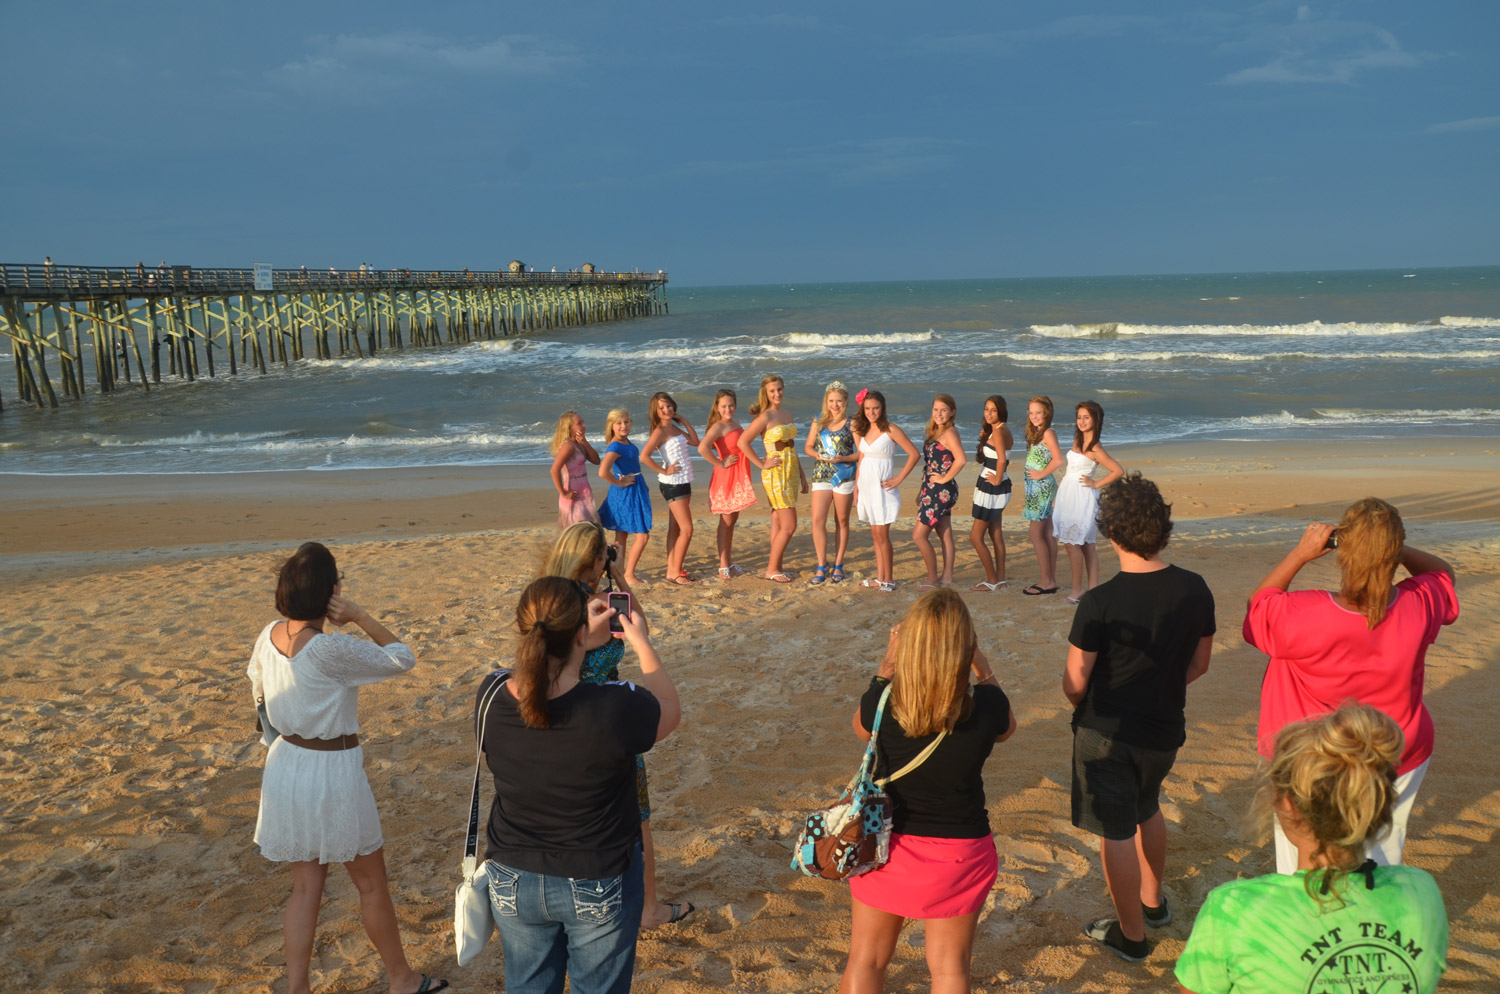 Junior Miss Nudist Pageant Videos - Index of /wp-content/gallery/2012-miss-junior-flagler-county-pageant